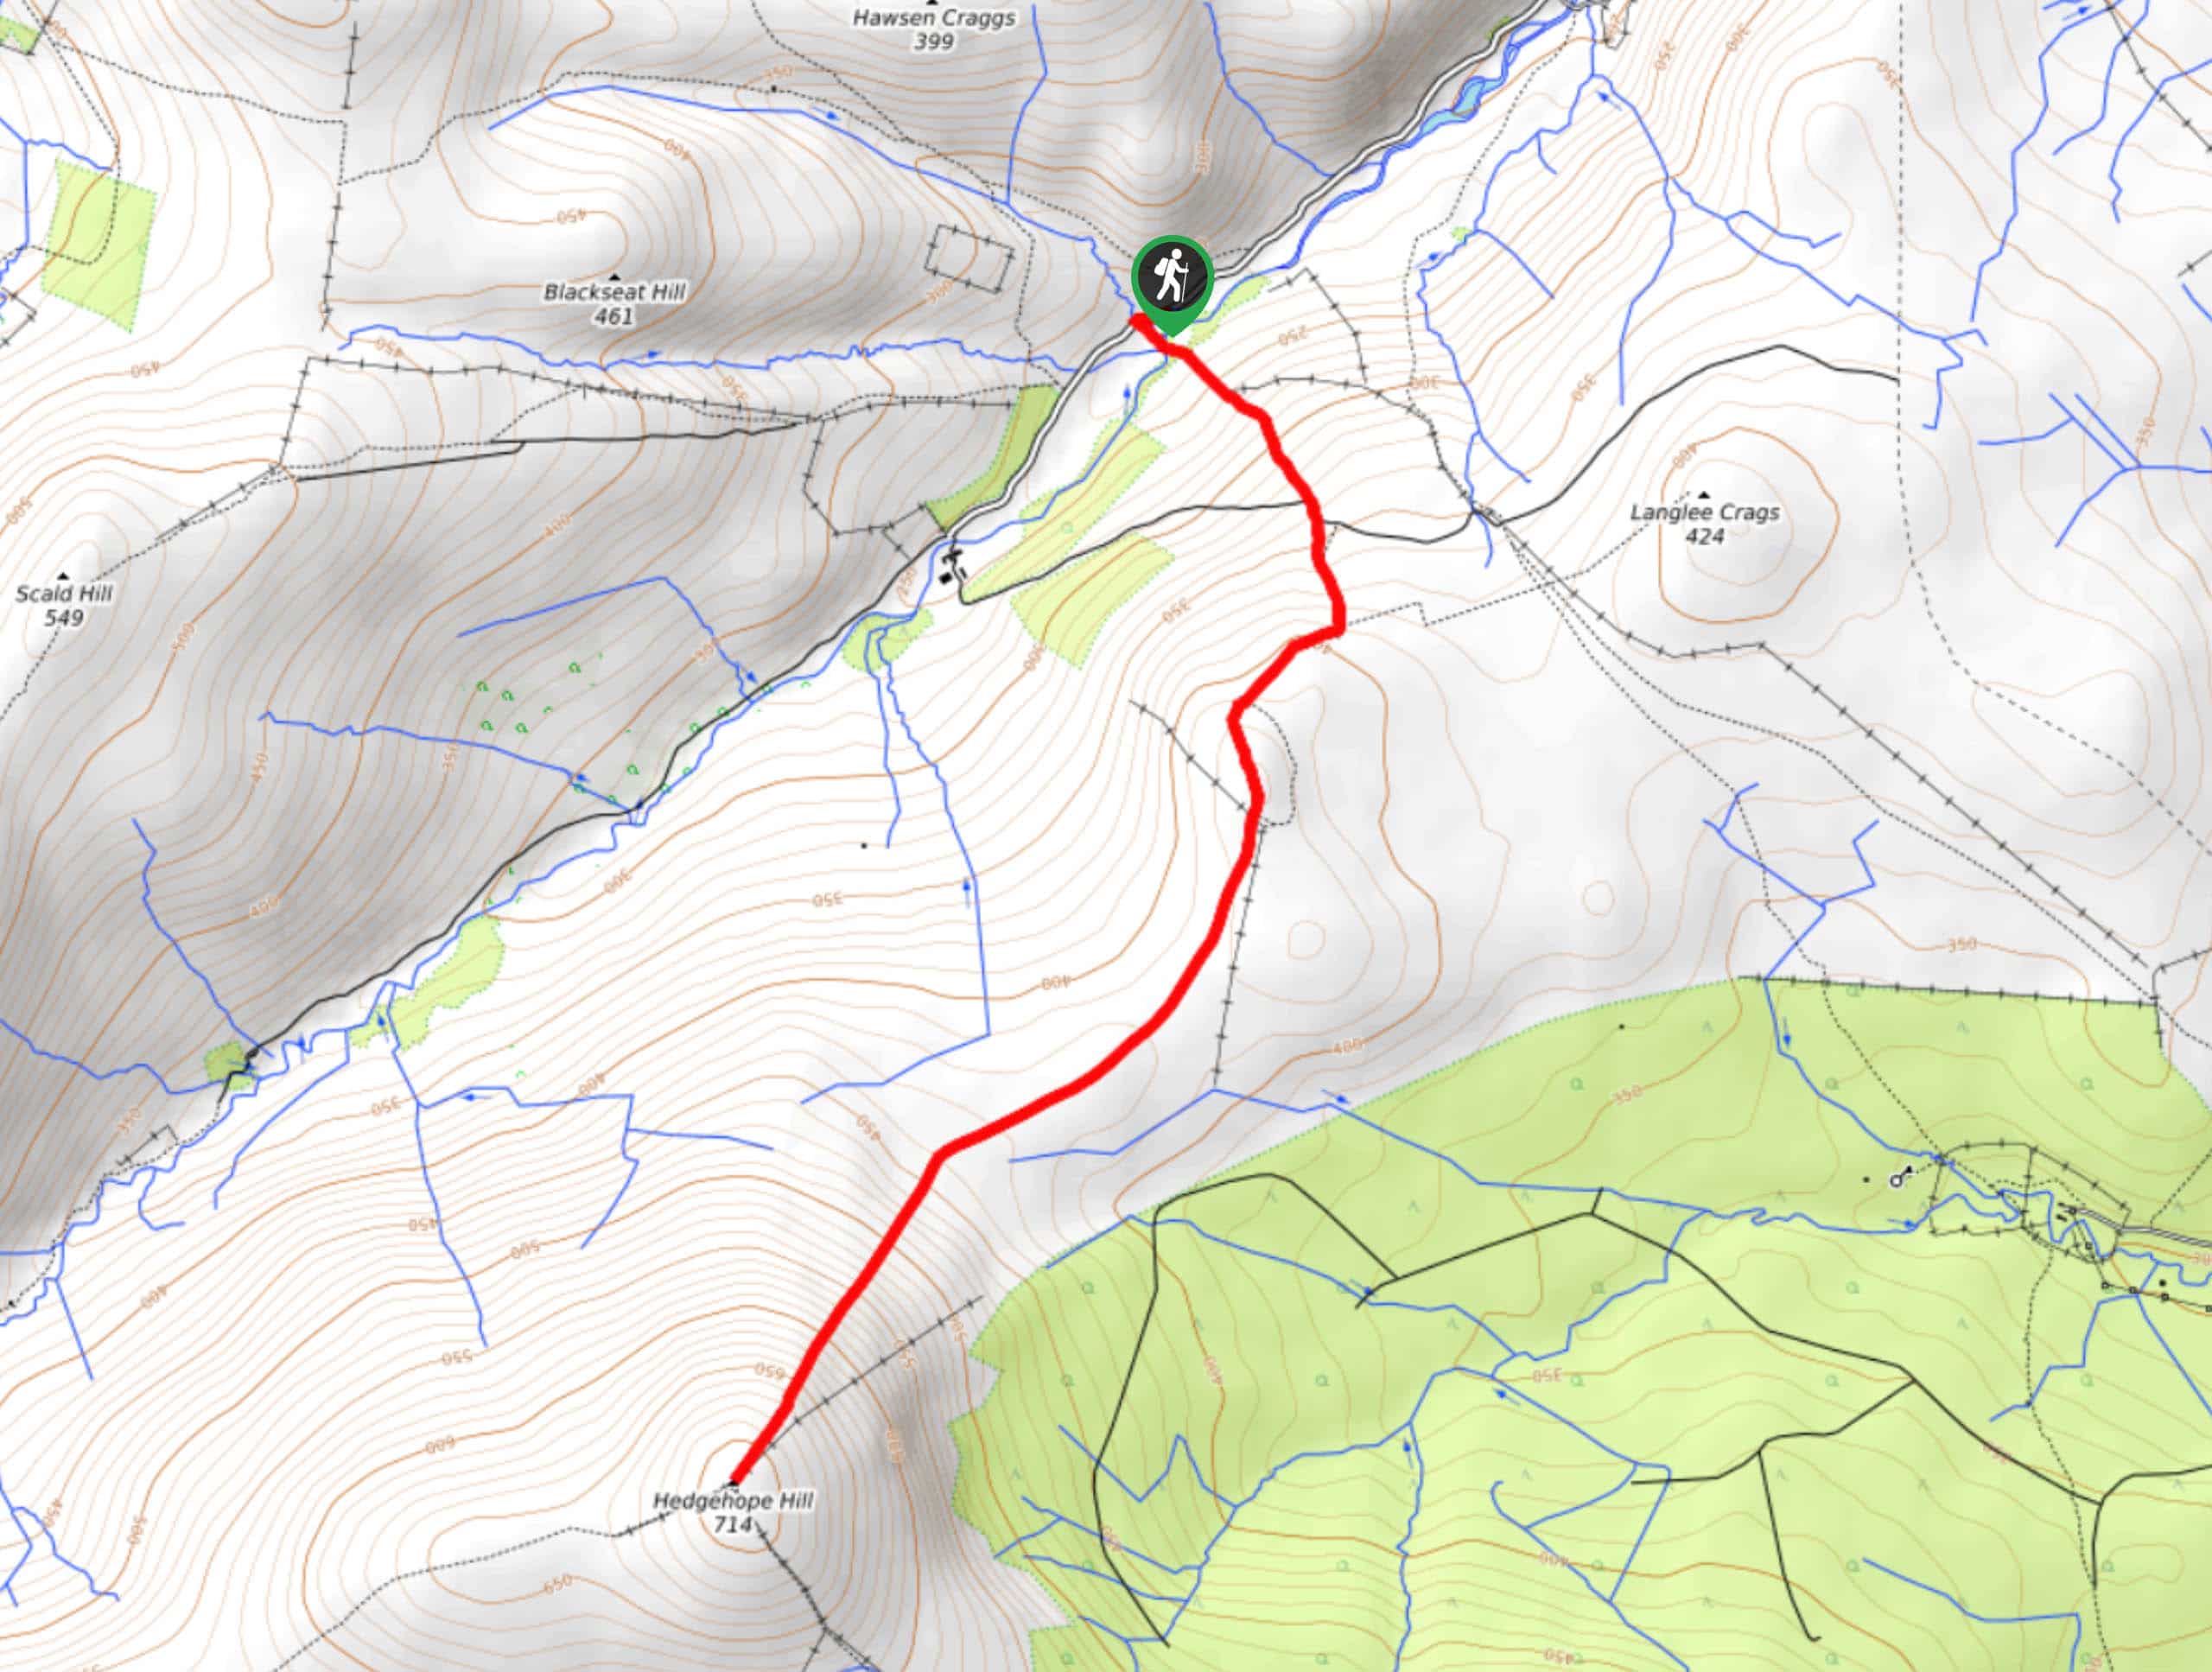 The Cheviots and Hedgehope Hill Walk Map